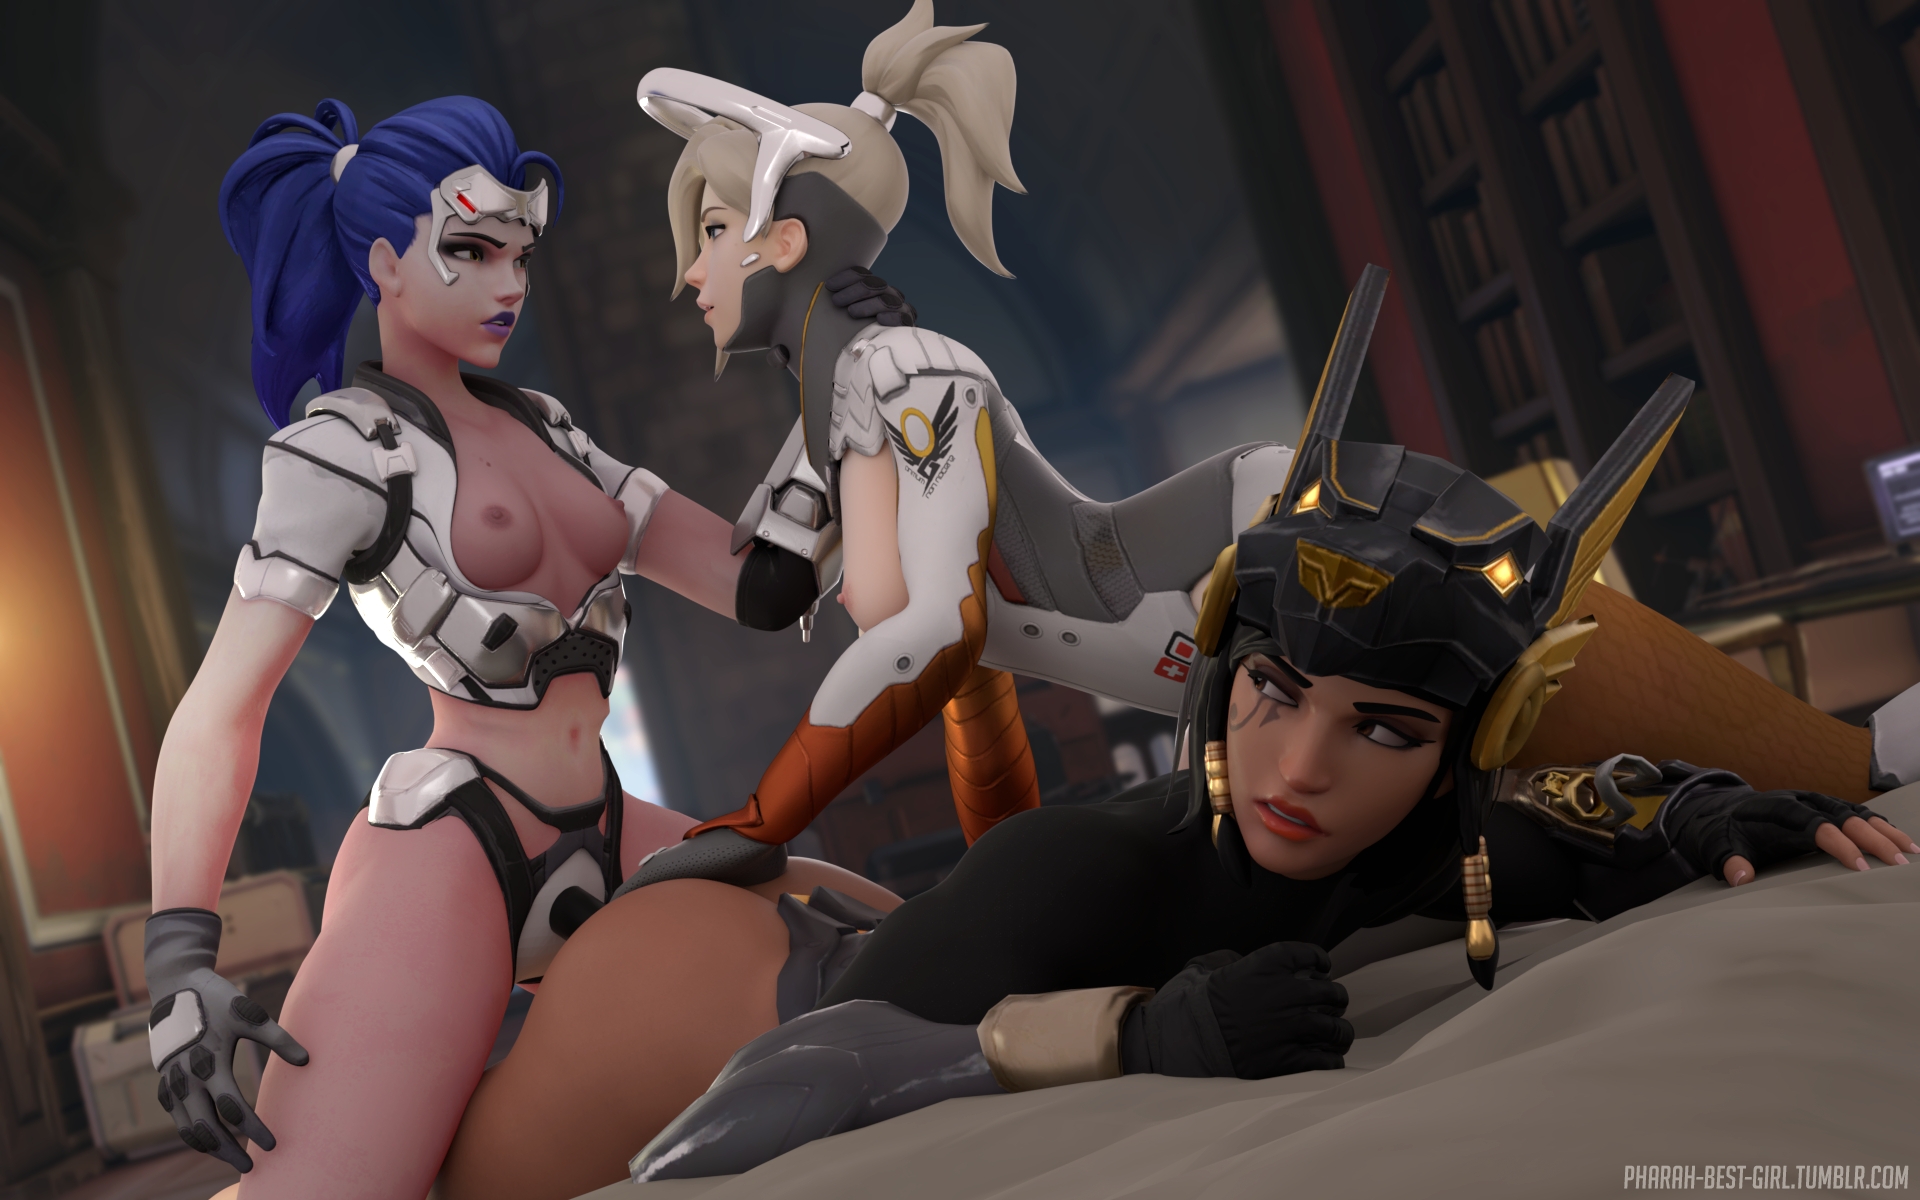 PharMercyMaker Pharah Overwatch 3d Porn Sexy Nude Natural Boobs Tits Lesbian Threesome Strapon